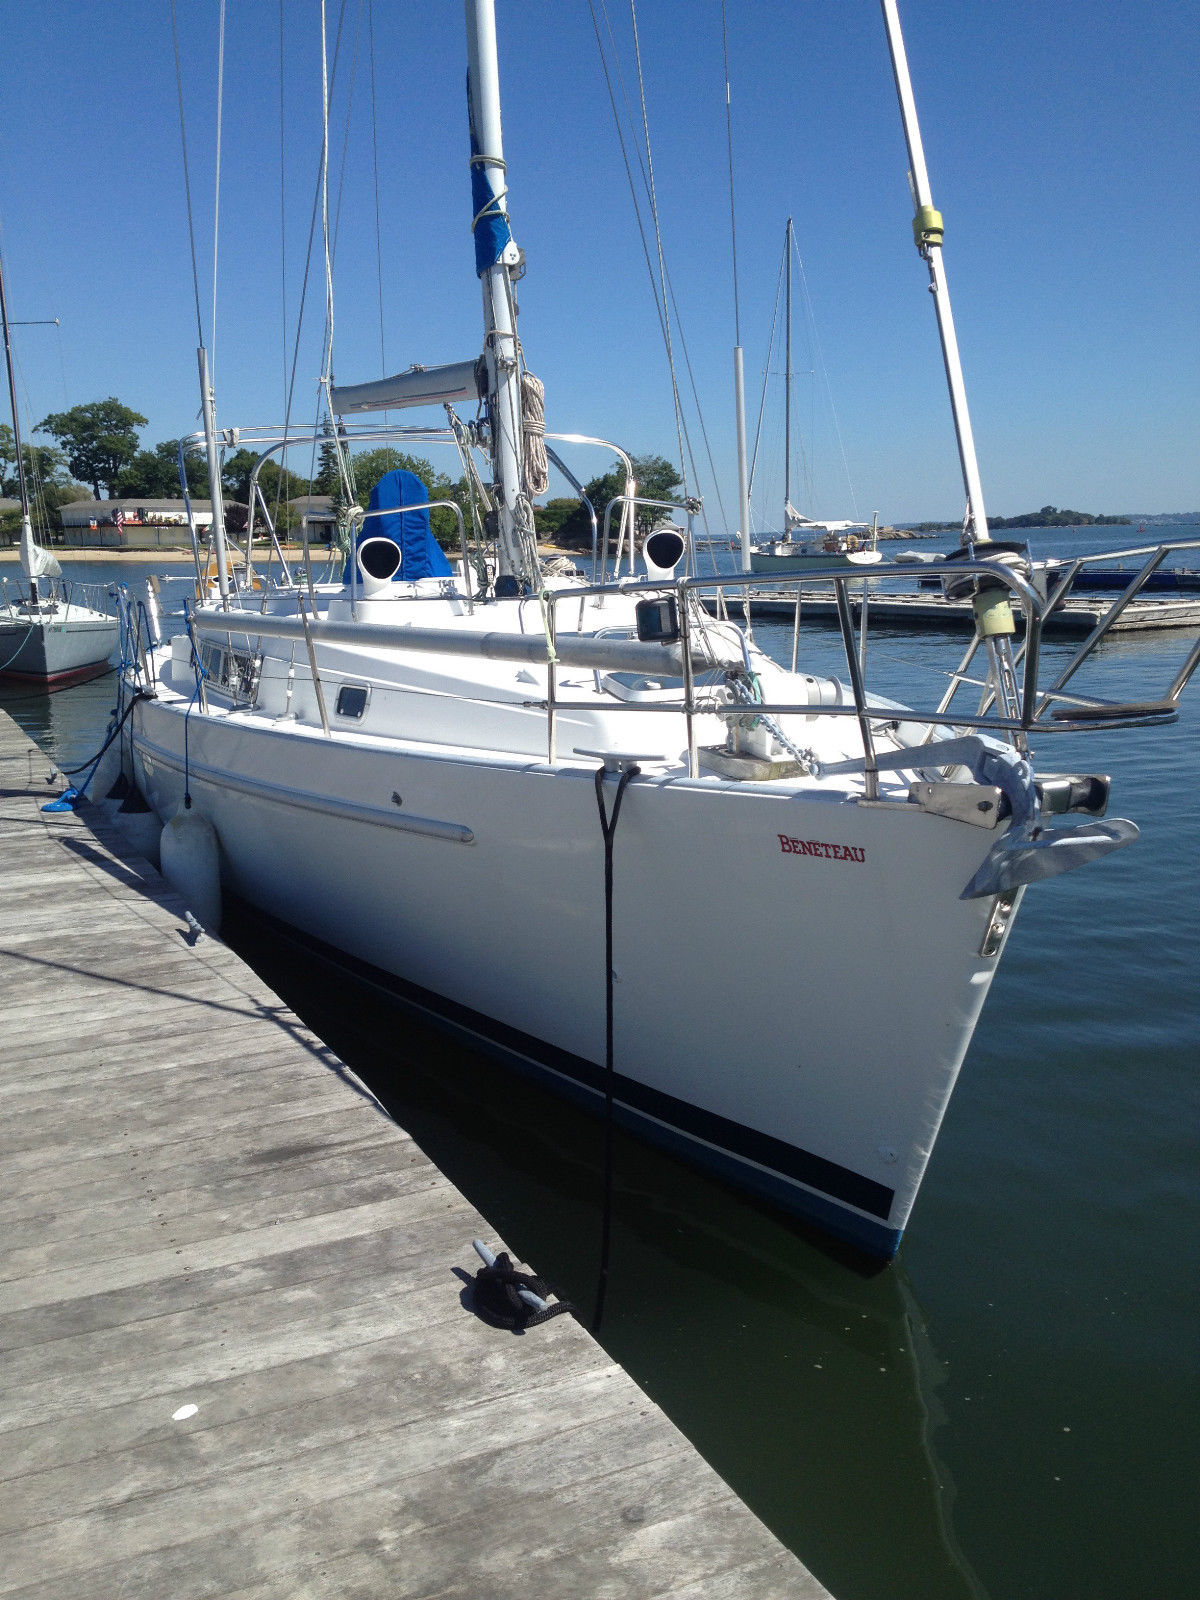 40 foot plus sailboats for sale